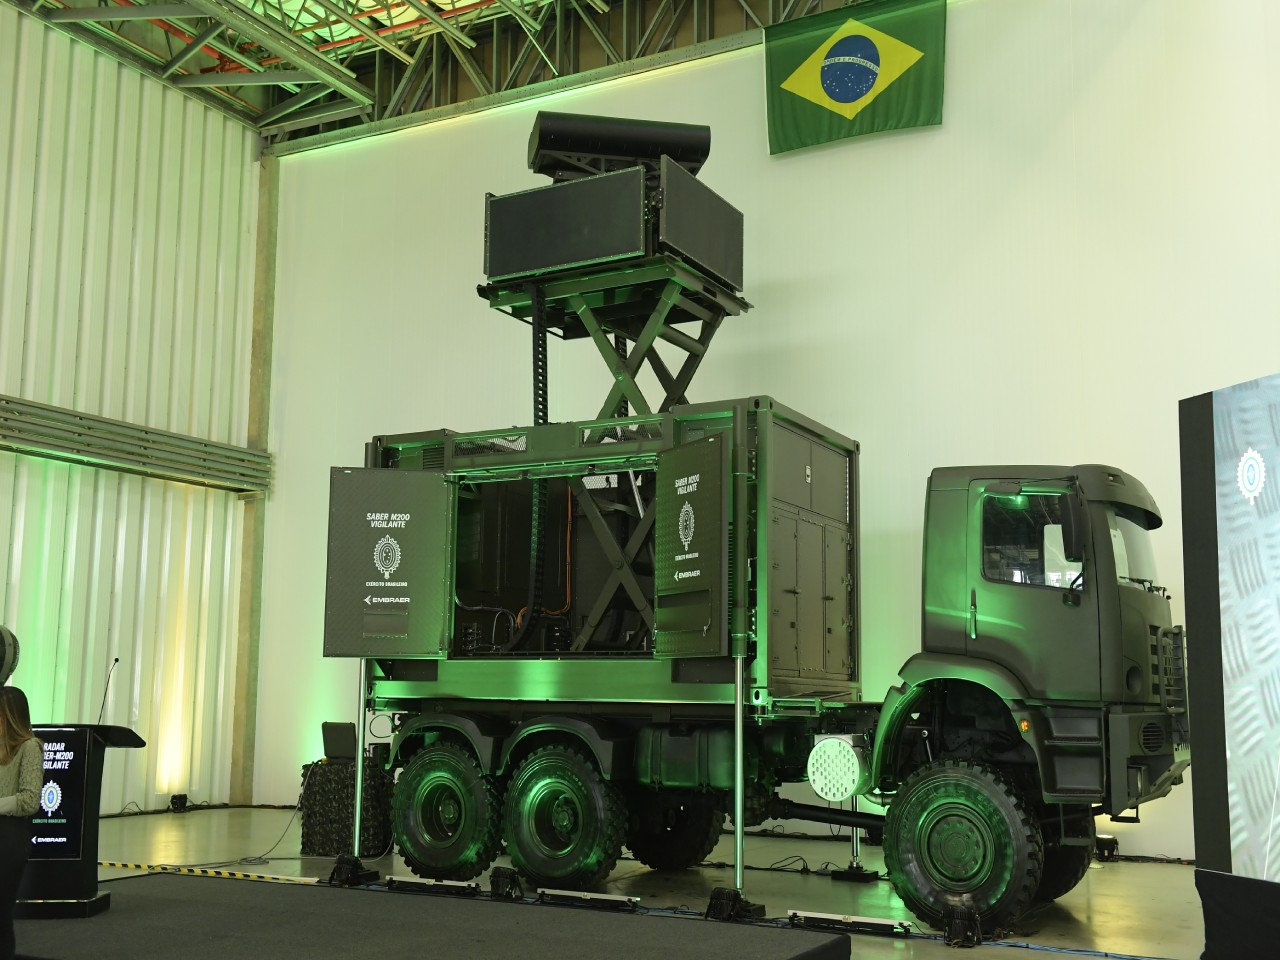 Brazilian Army and Embraer Present Early Warning Air Surveillance Radar